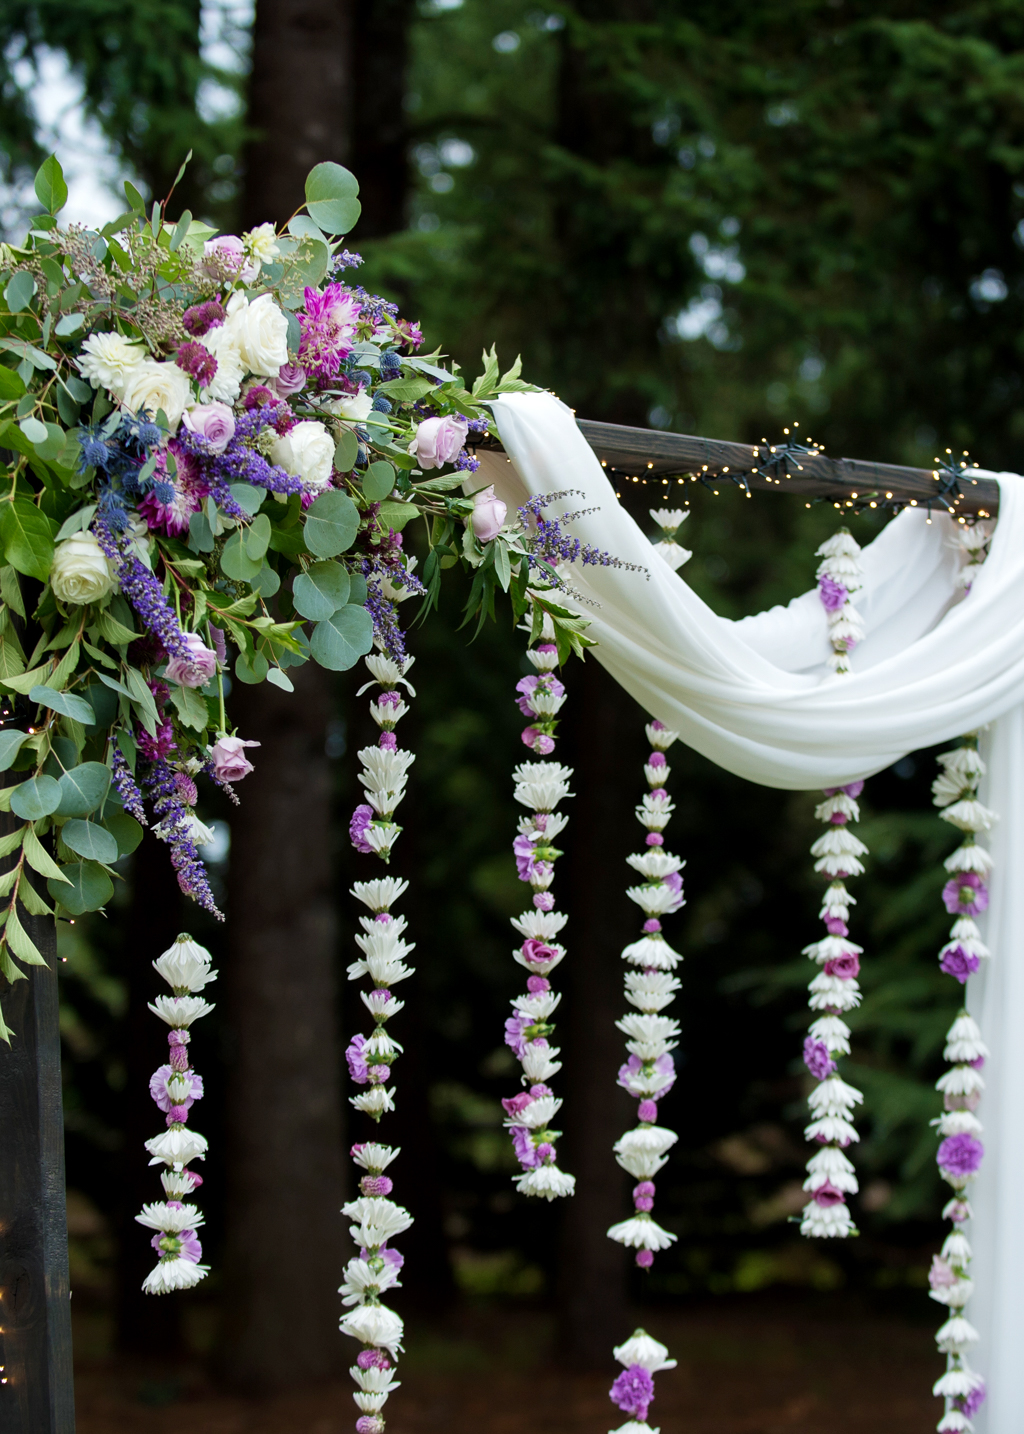 strings of purple and ivory flowers hang from a wedding ceremony arbor draped with white fabric